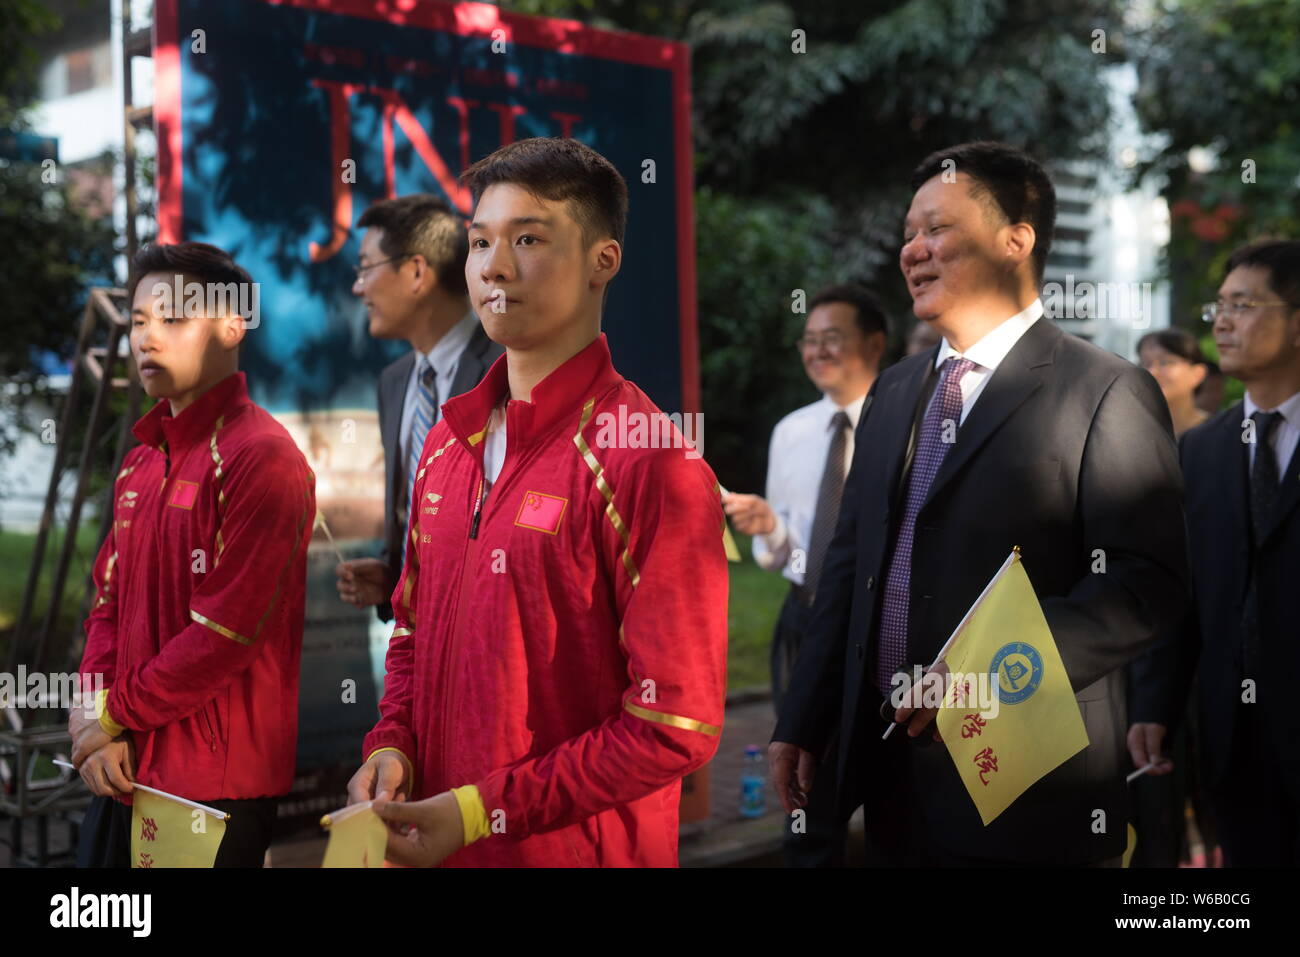 Chinese diving champions Chen Aisen and Xie Siyi, both of whom are graduates, walk on the red carpet for a graduation ceremony held by Jinan Universit Stock Photo